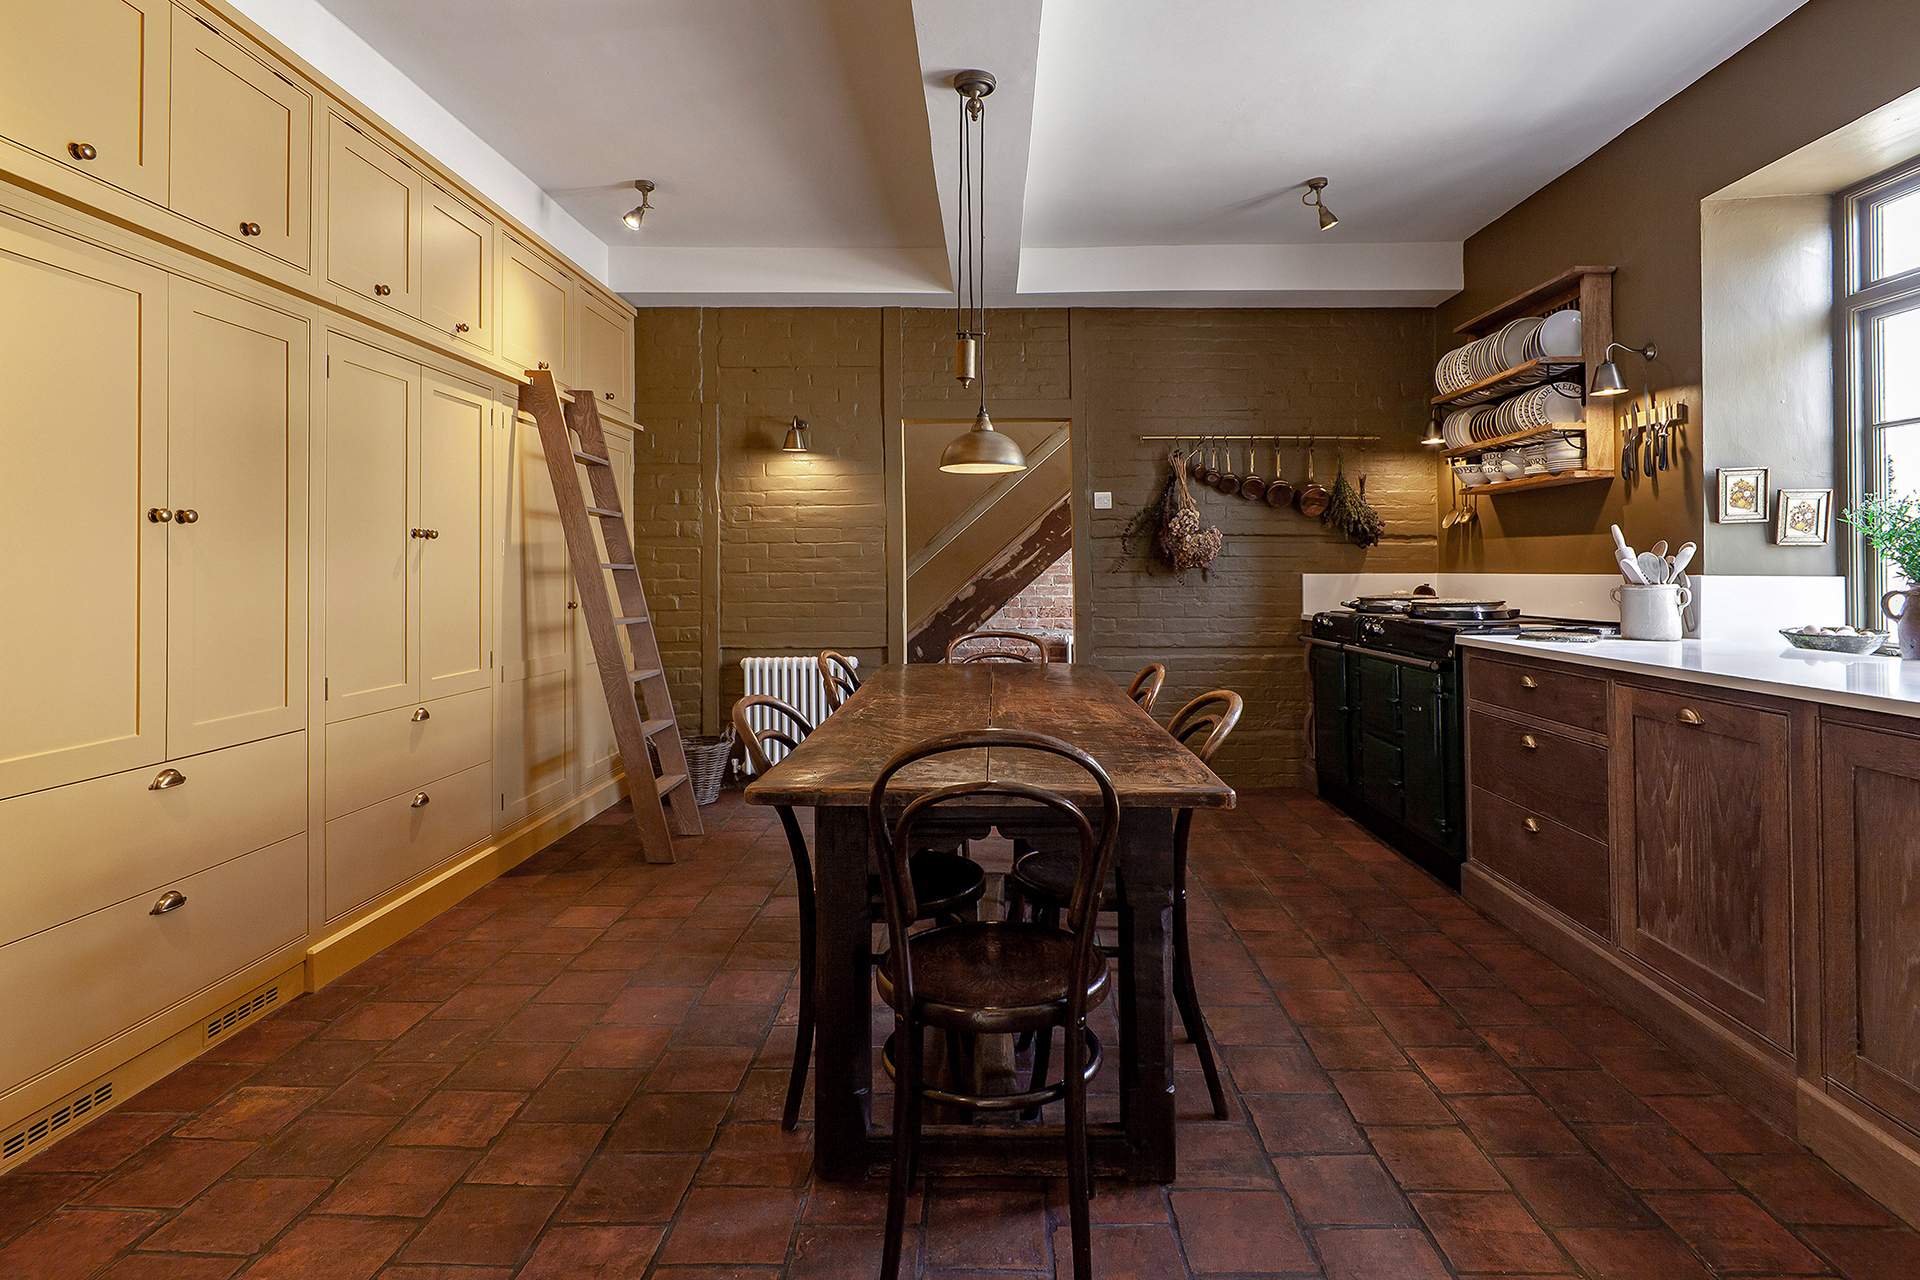 kitchen with built in yellow floor to ceiling cabinets along with rustic kitchen cabinetry